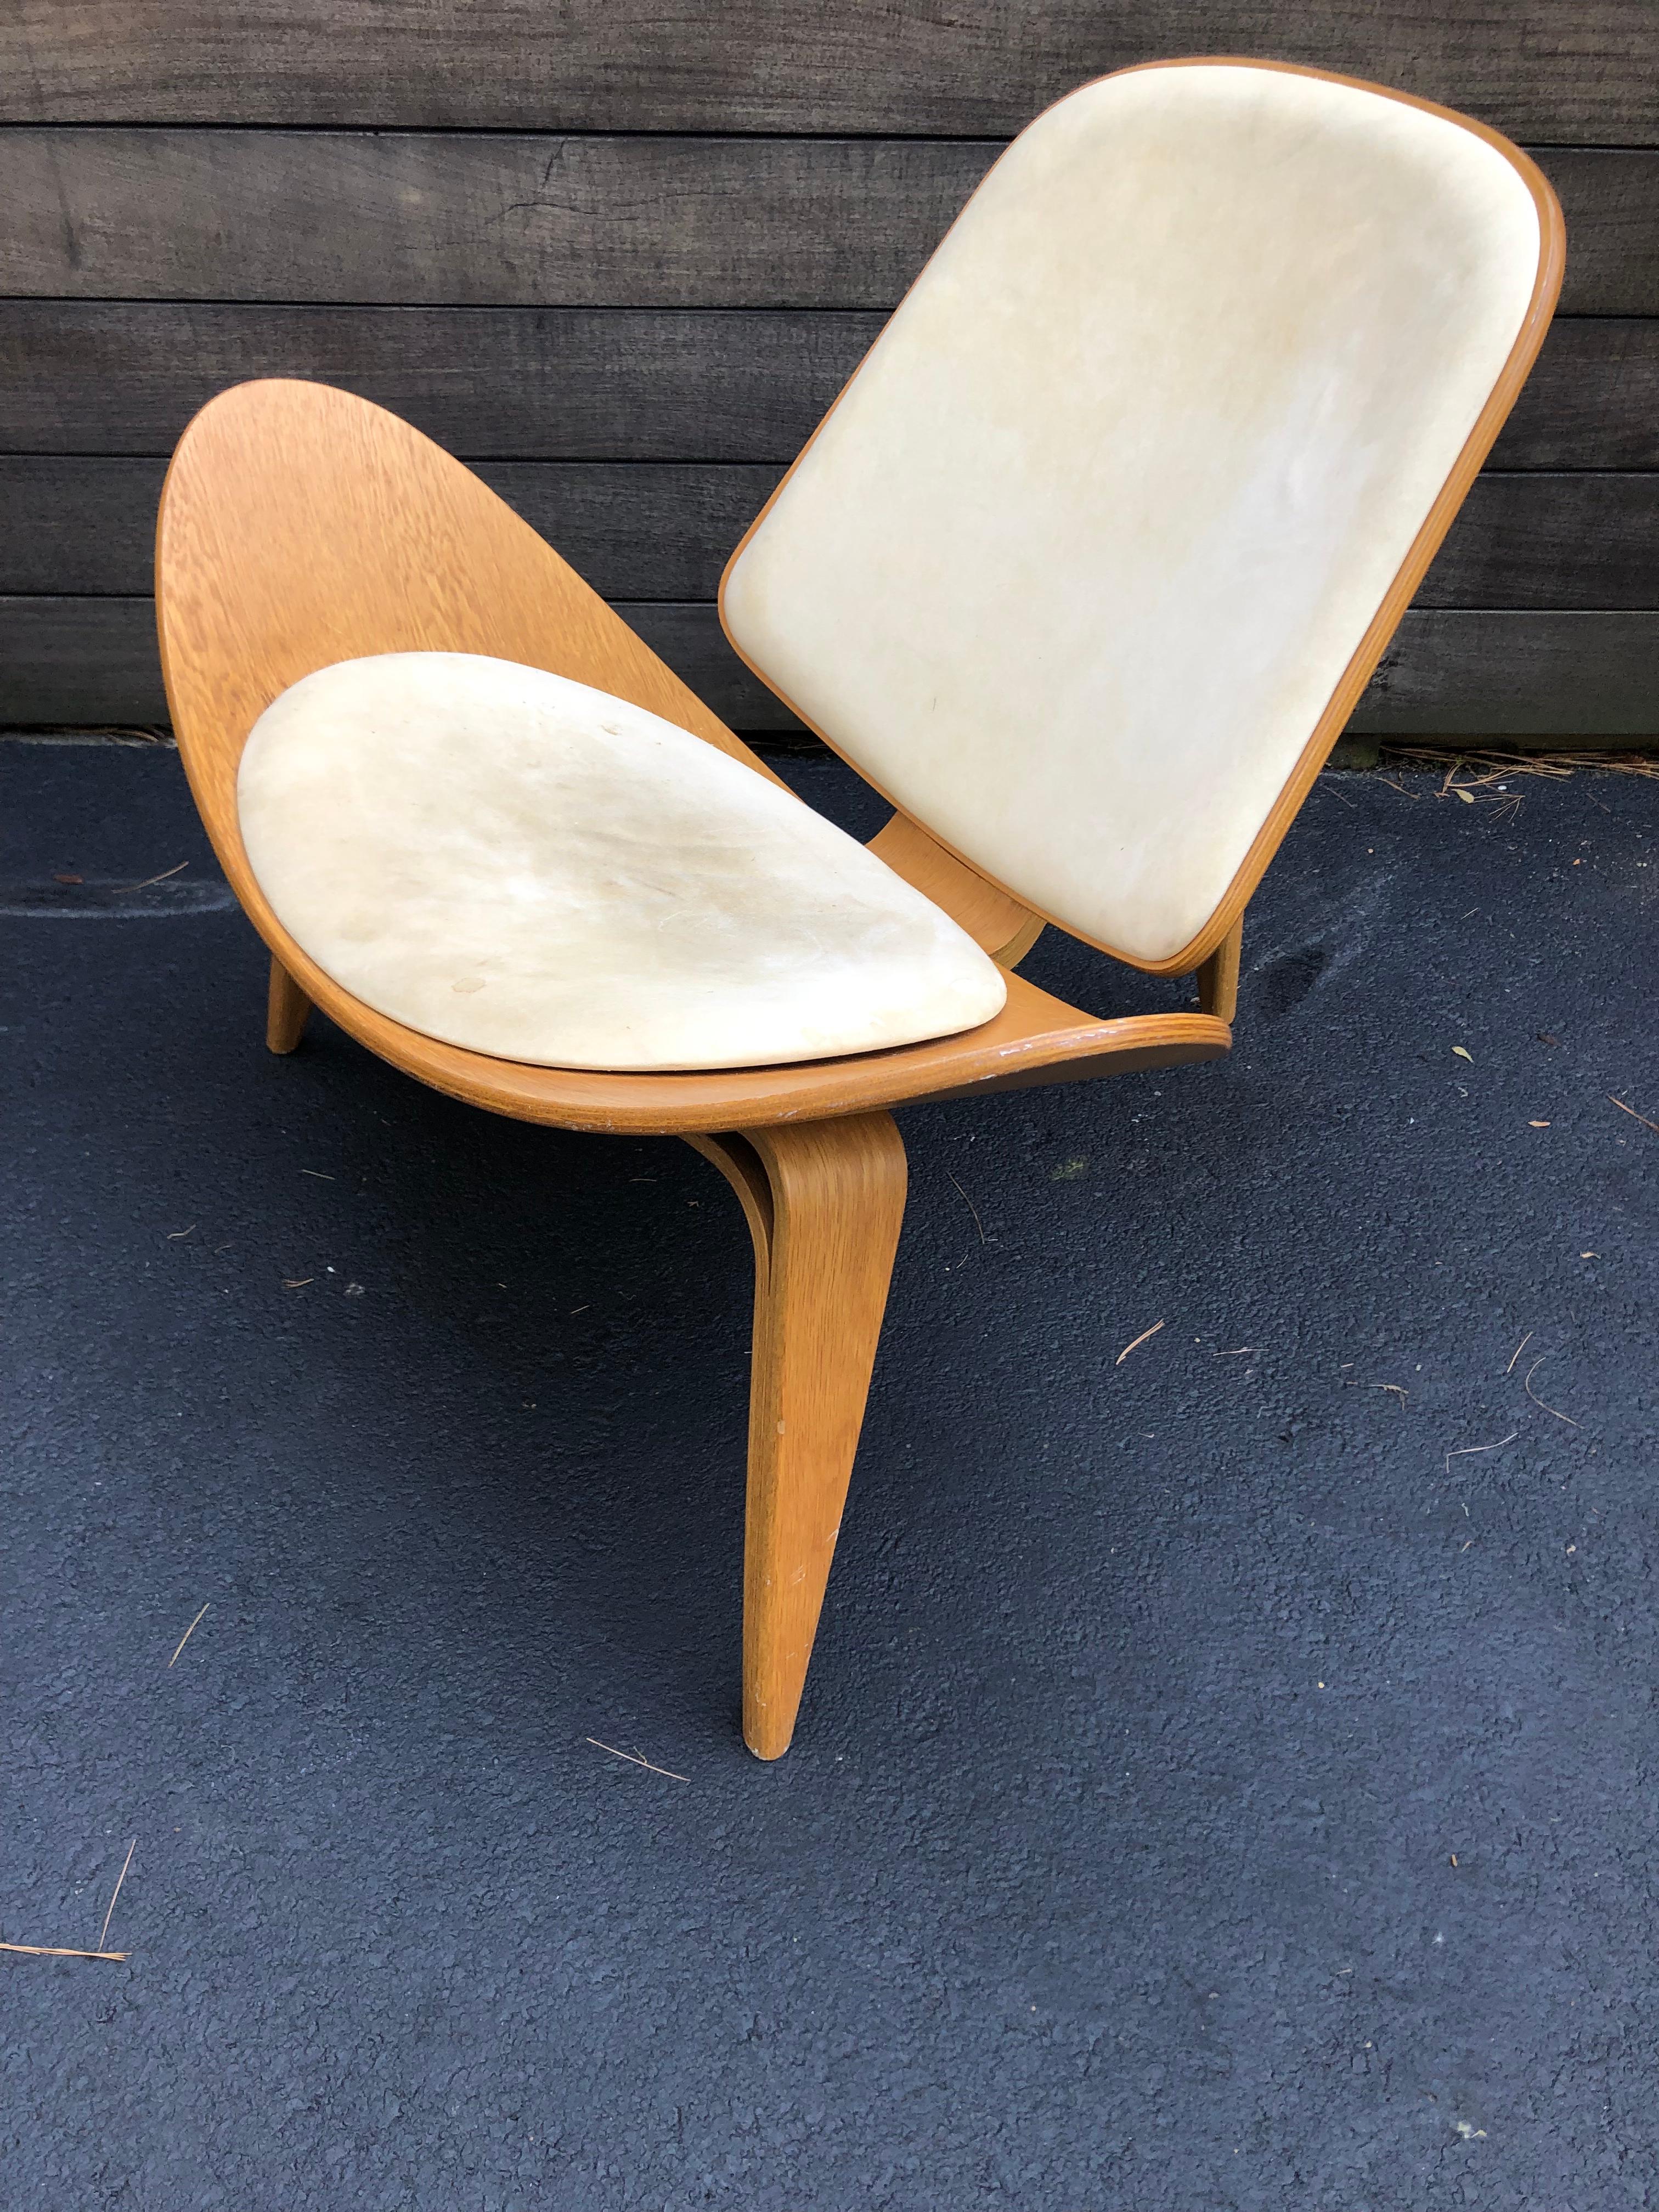 Hans Wegner molded walnut plywood shell chair model CH07. Design dates to 1963, reintroduced in the late 1990's. This model dates to 2006 and leather shows appropriate wear. Would be easy enough to recover seat and back. Surprisingly stable and